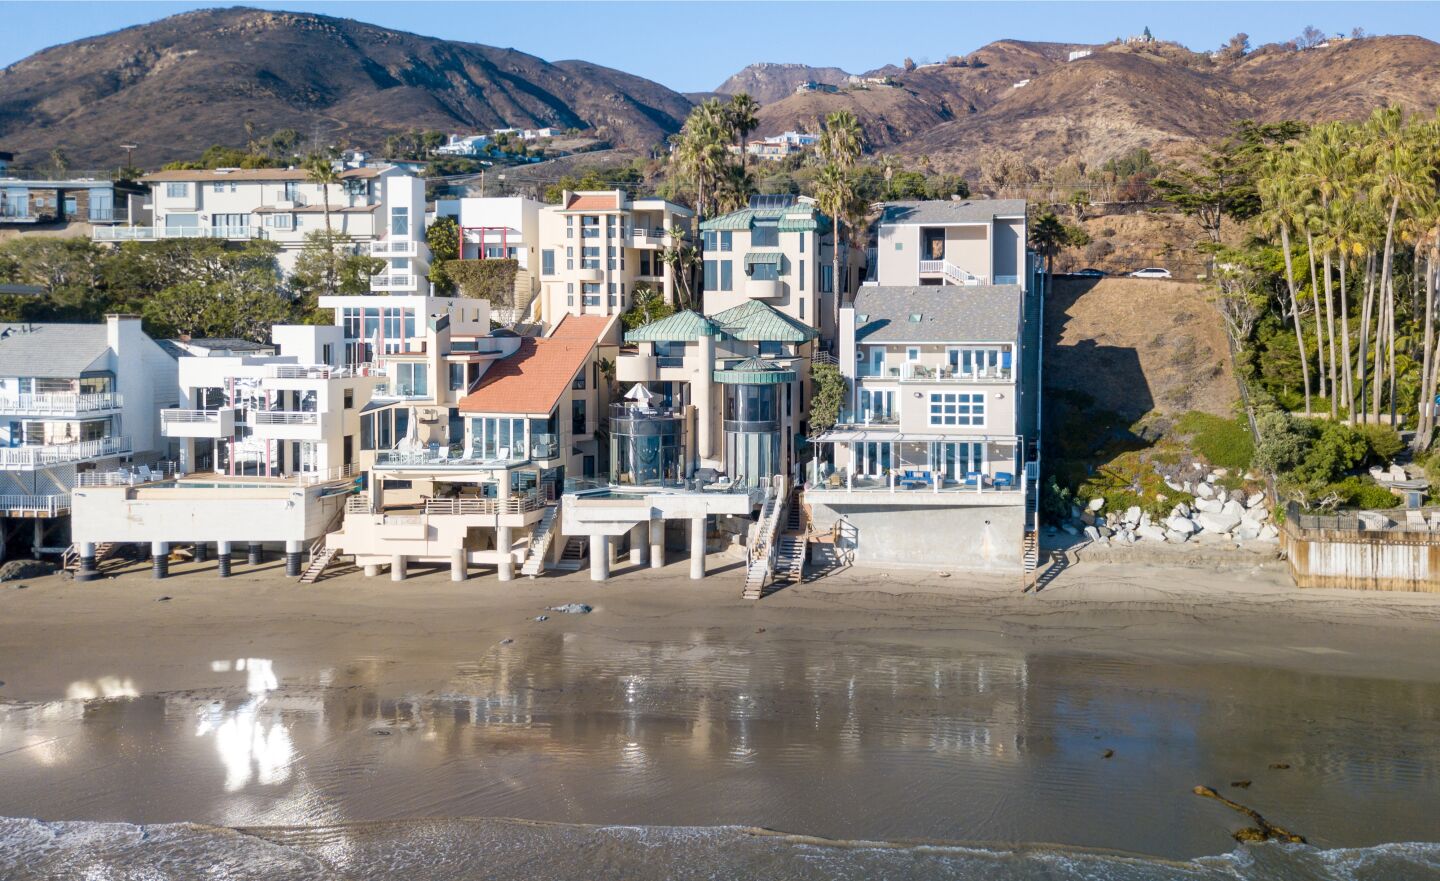 The beachfront home is steps from the ocean along the beach with other homes and hills behind them.